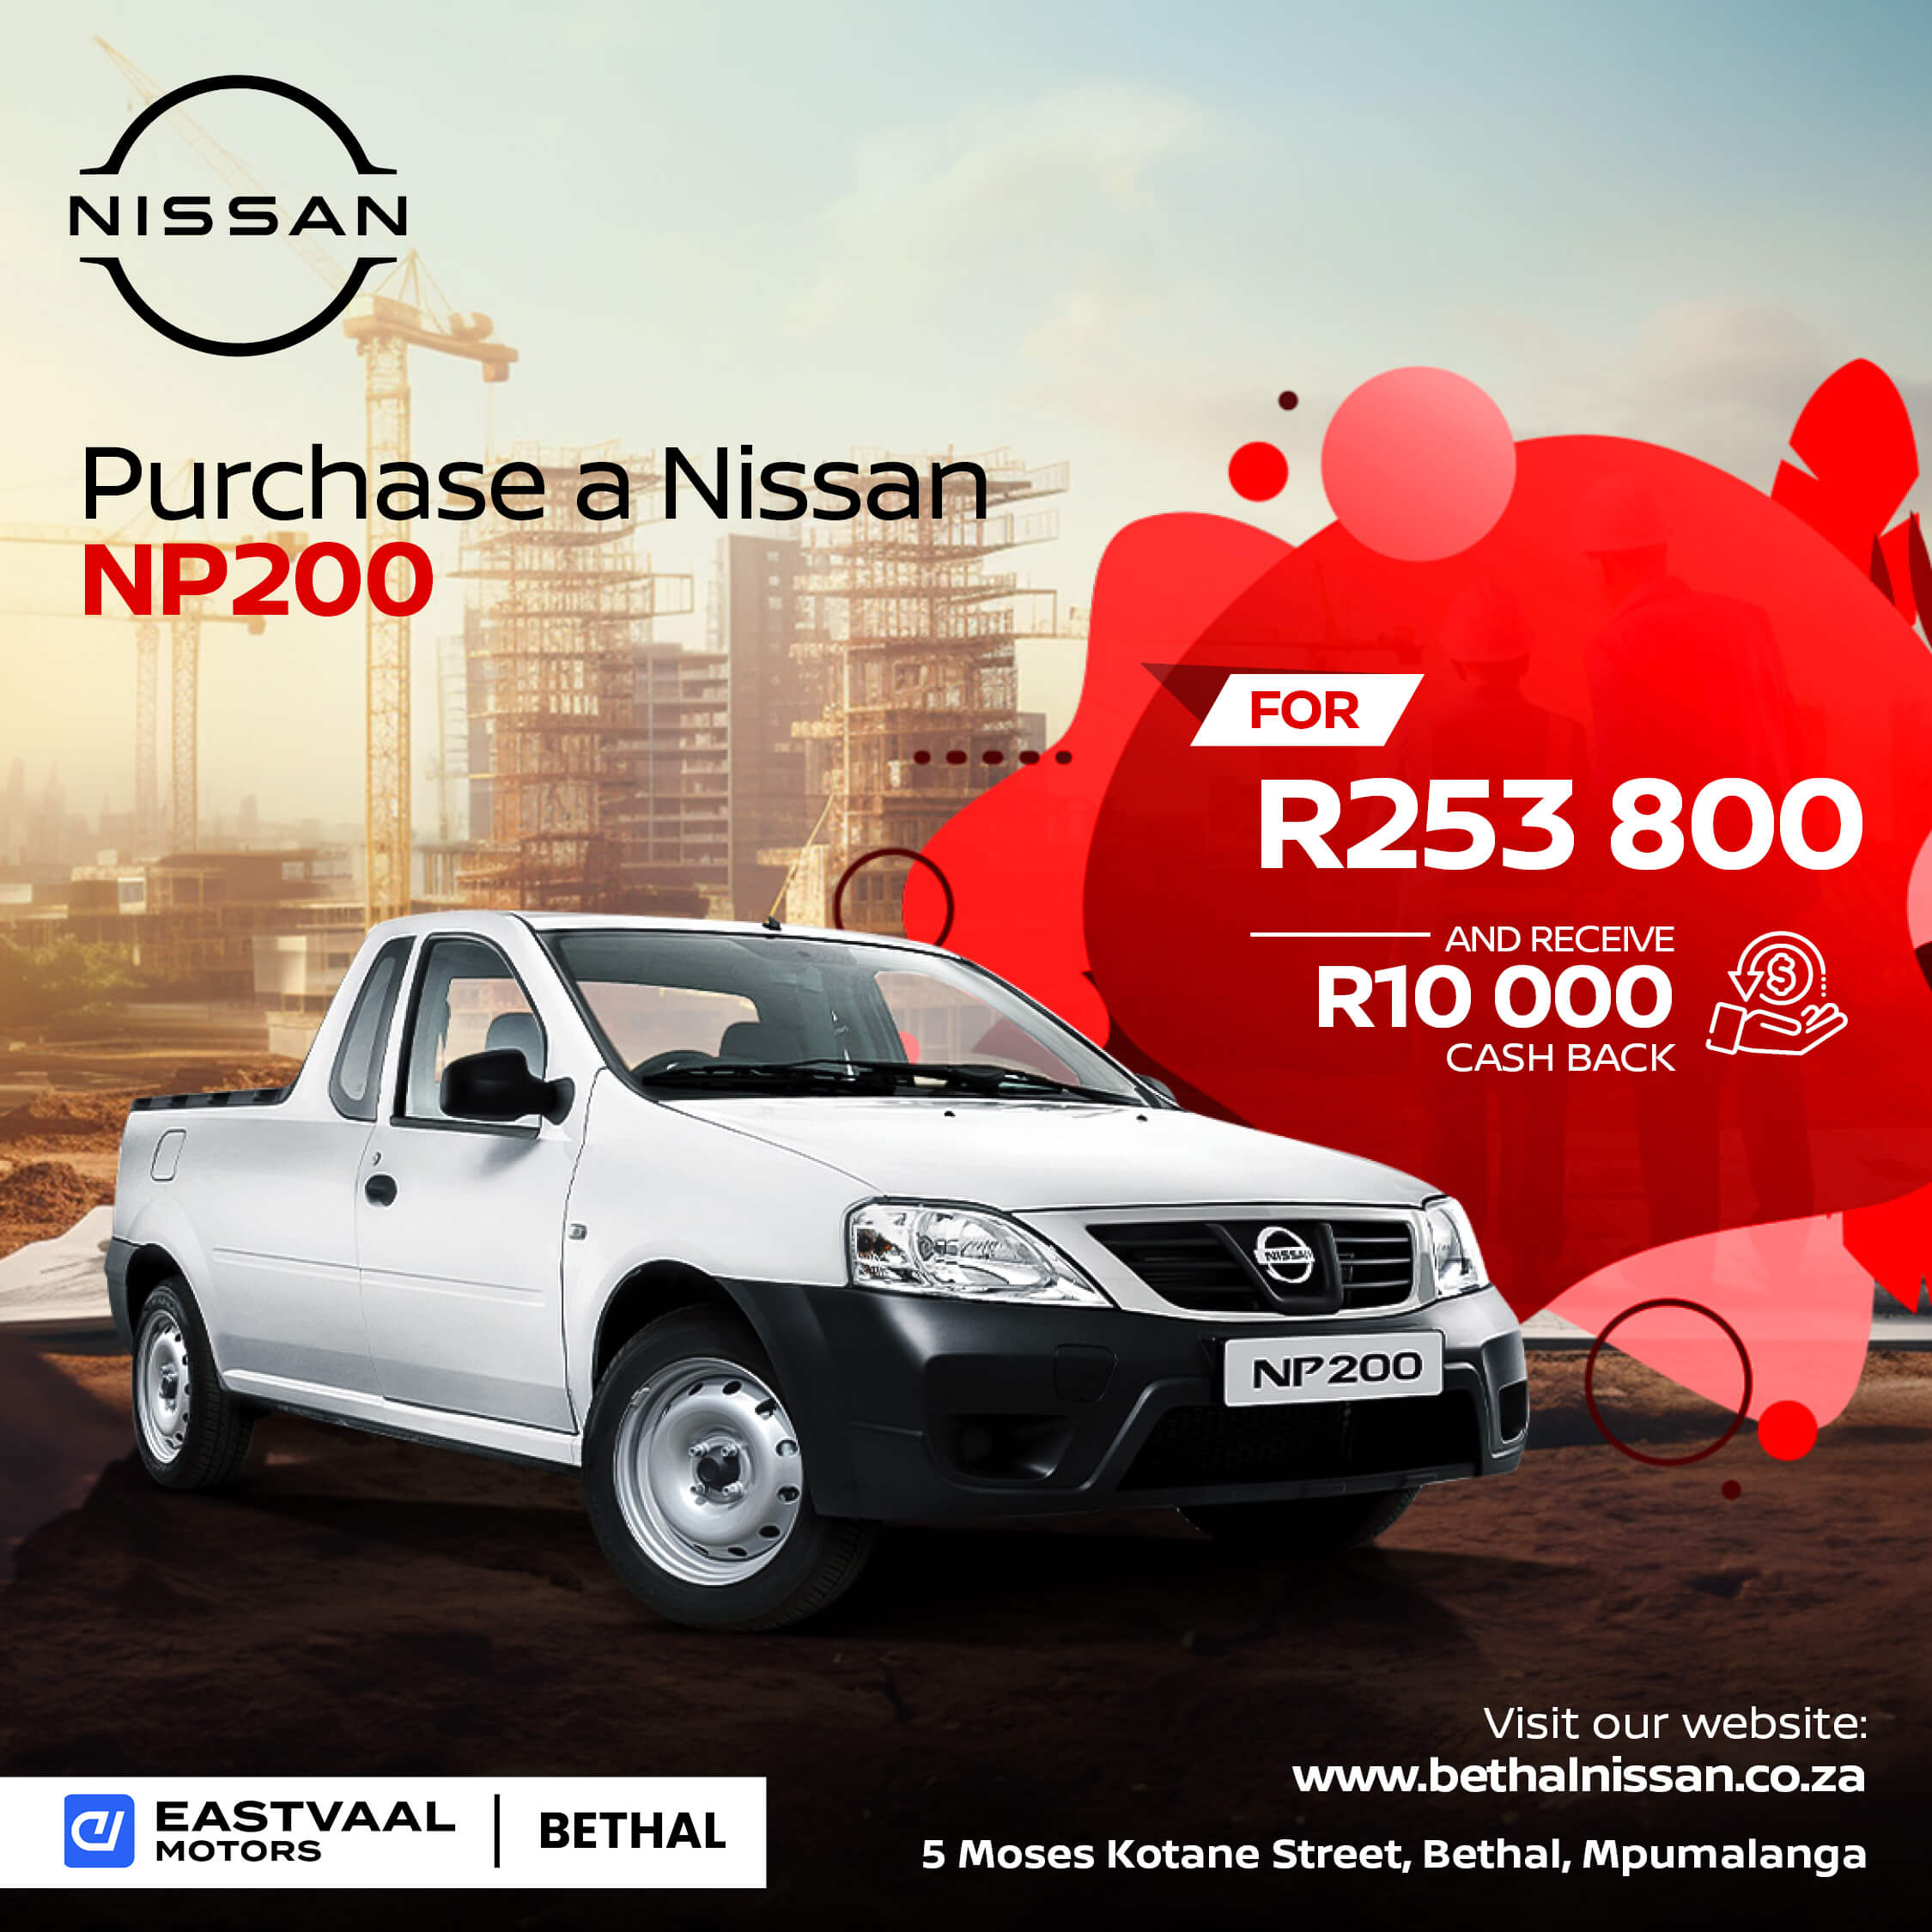 Purchase a Nissan NP200 image from Eastvaal Motors